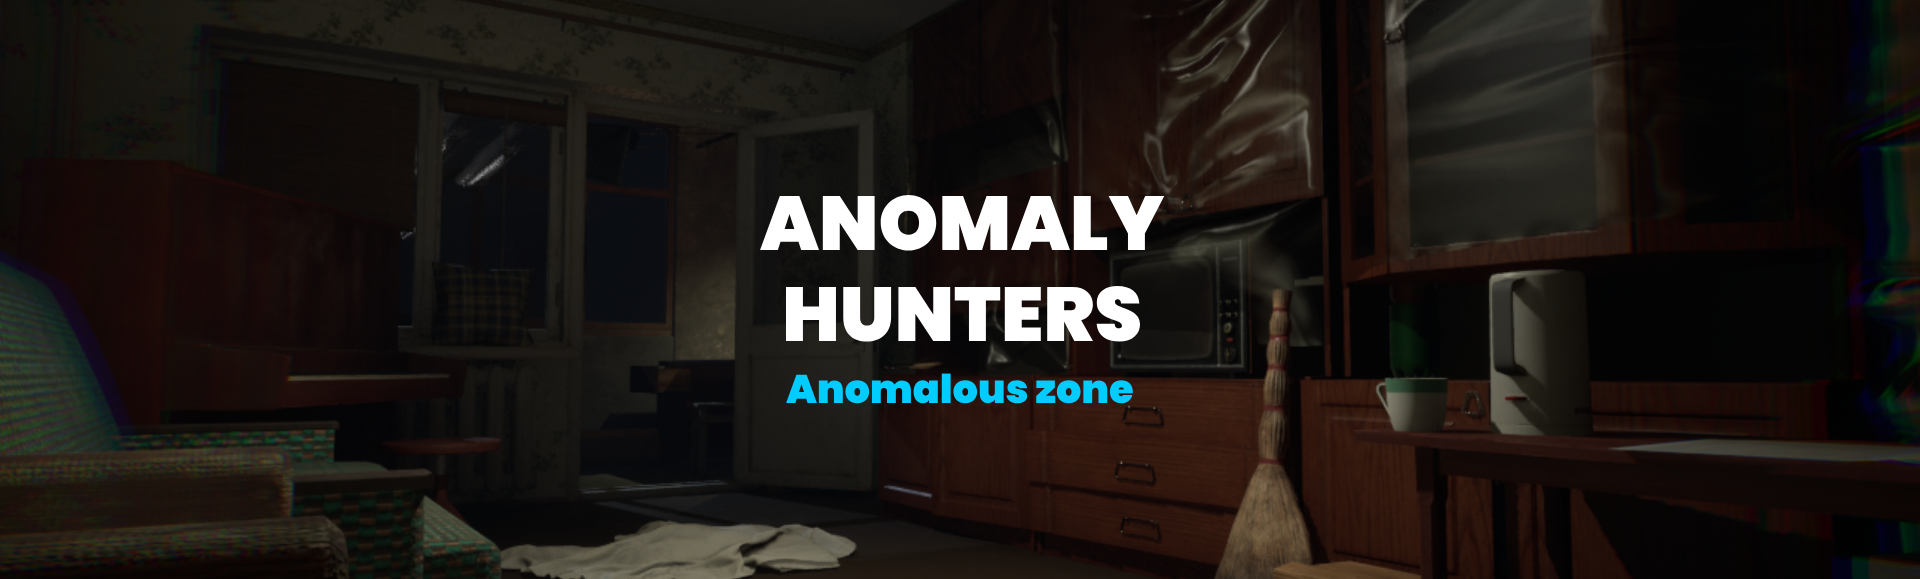 Anomaly Hunters -  Episode 1